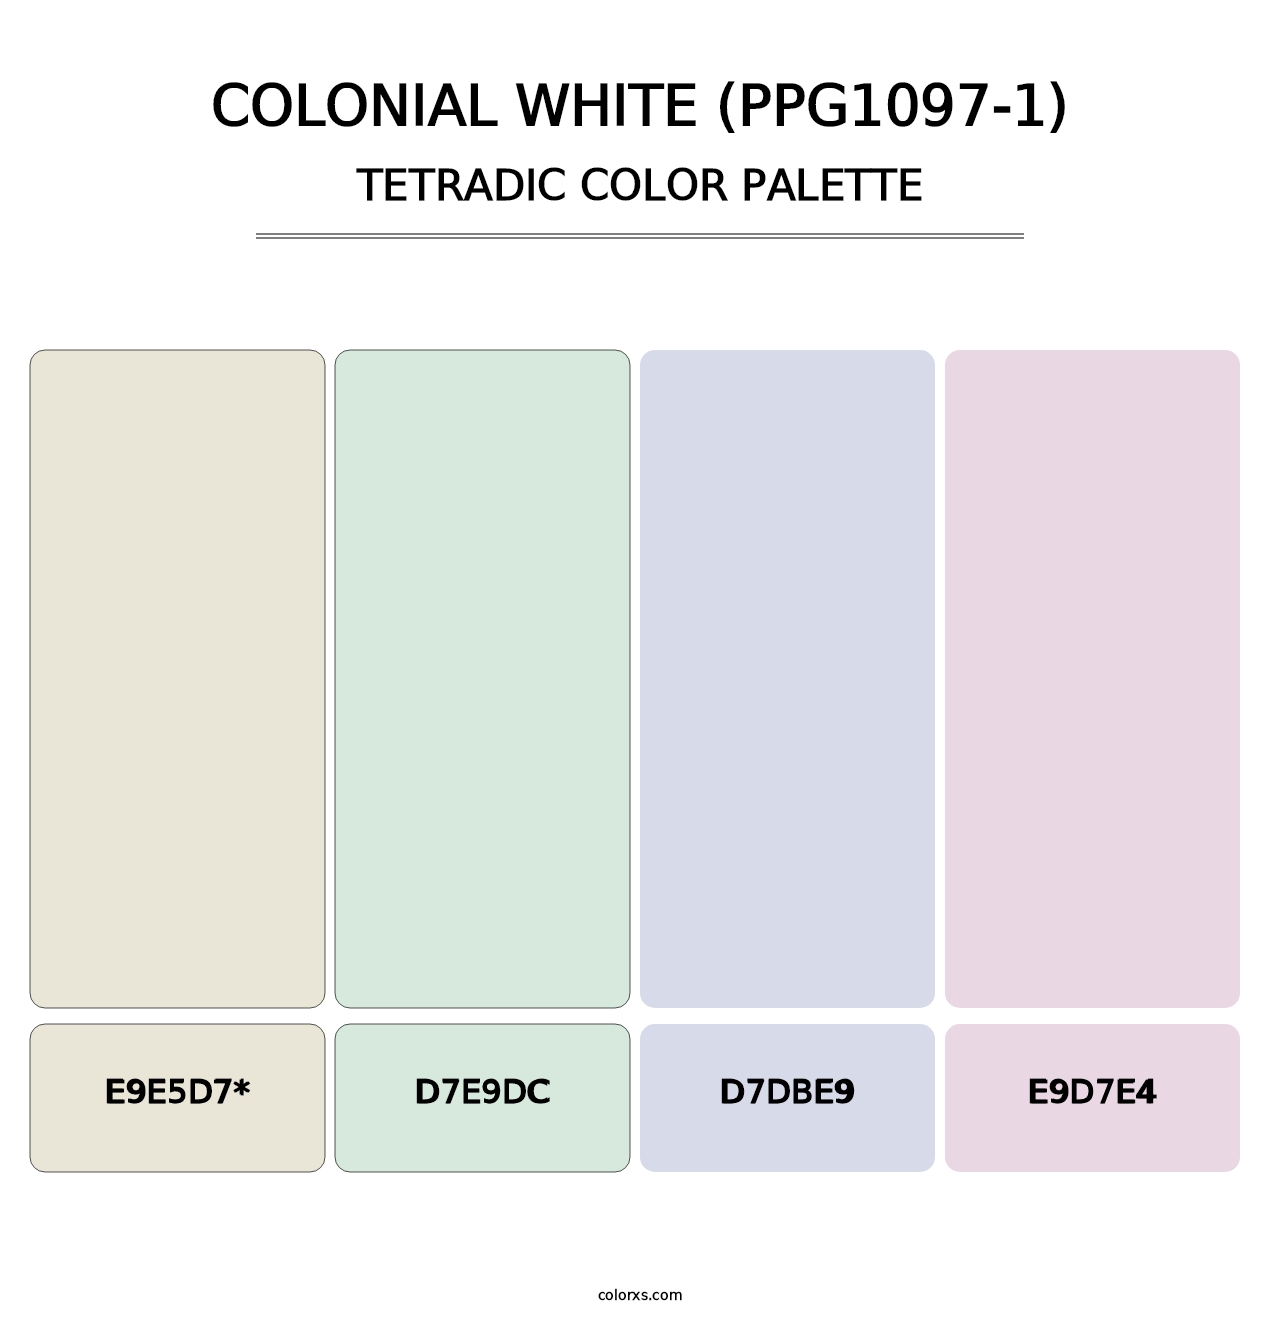 Colonial White (PPG1097-1) - Tetradic Color Palette